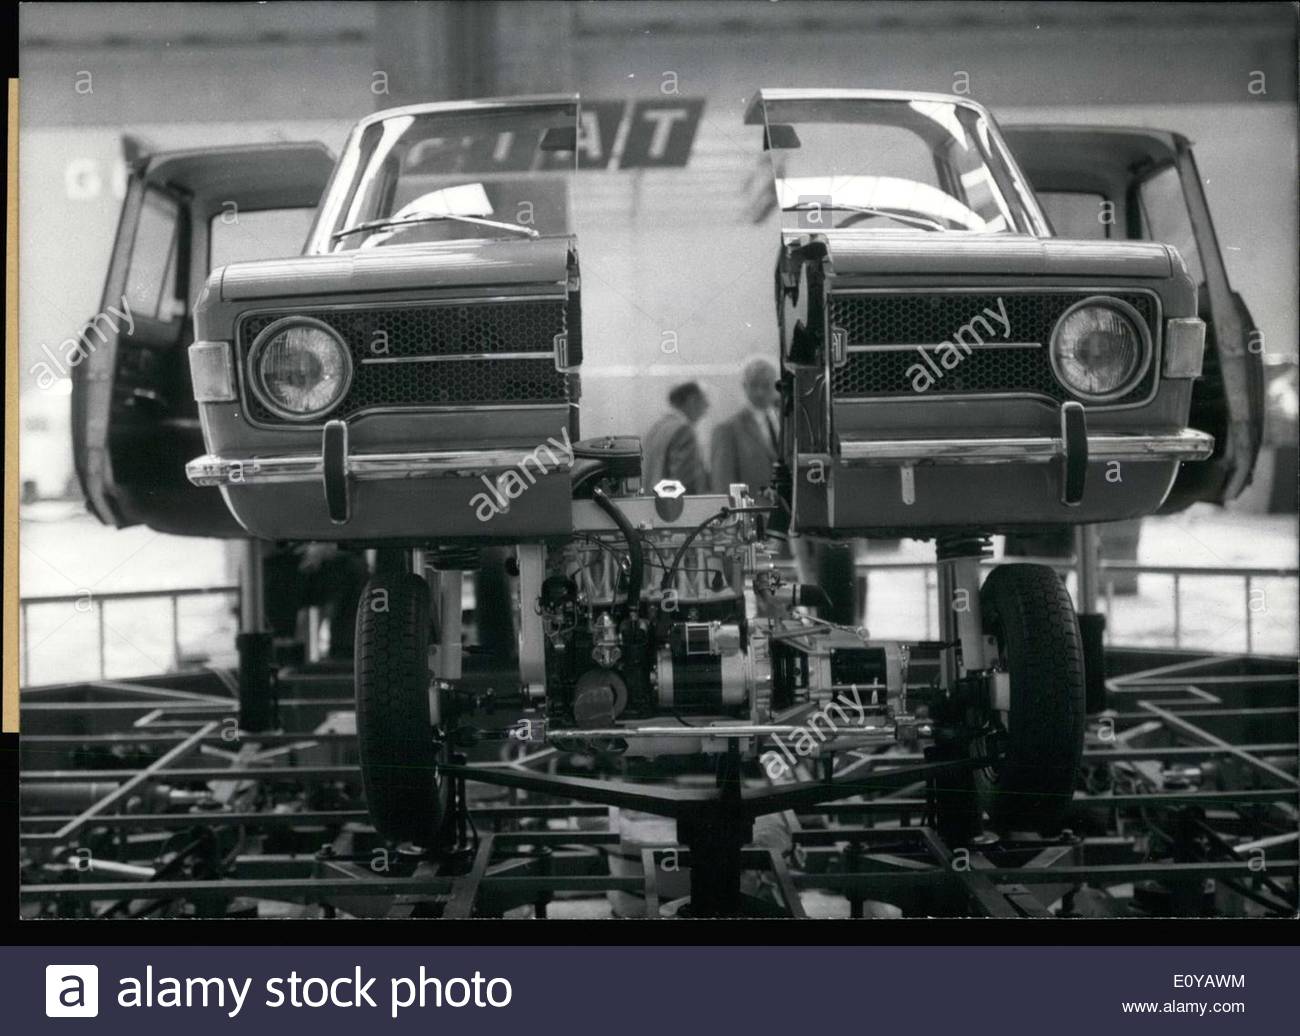 sep 21 1969 this fiat 128 is split down the middle disassembled like E0YAWM